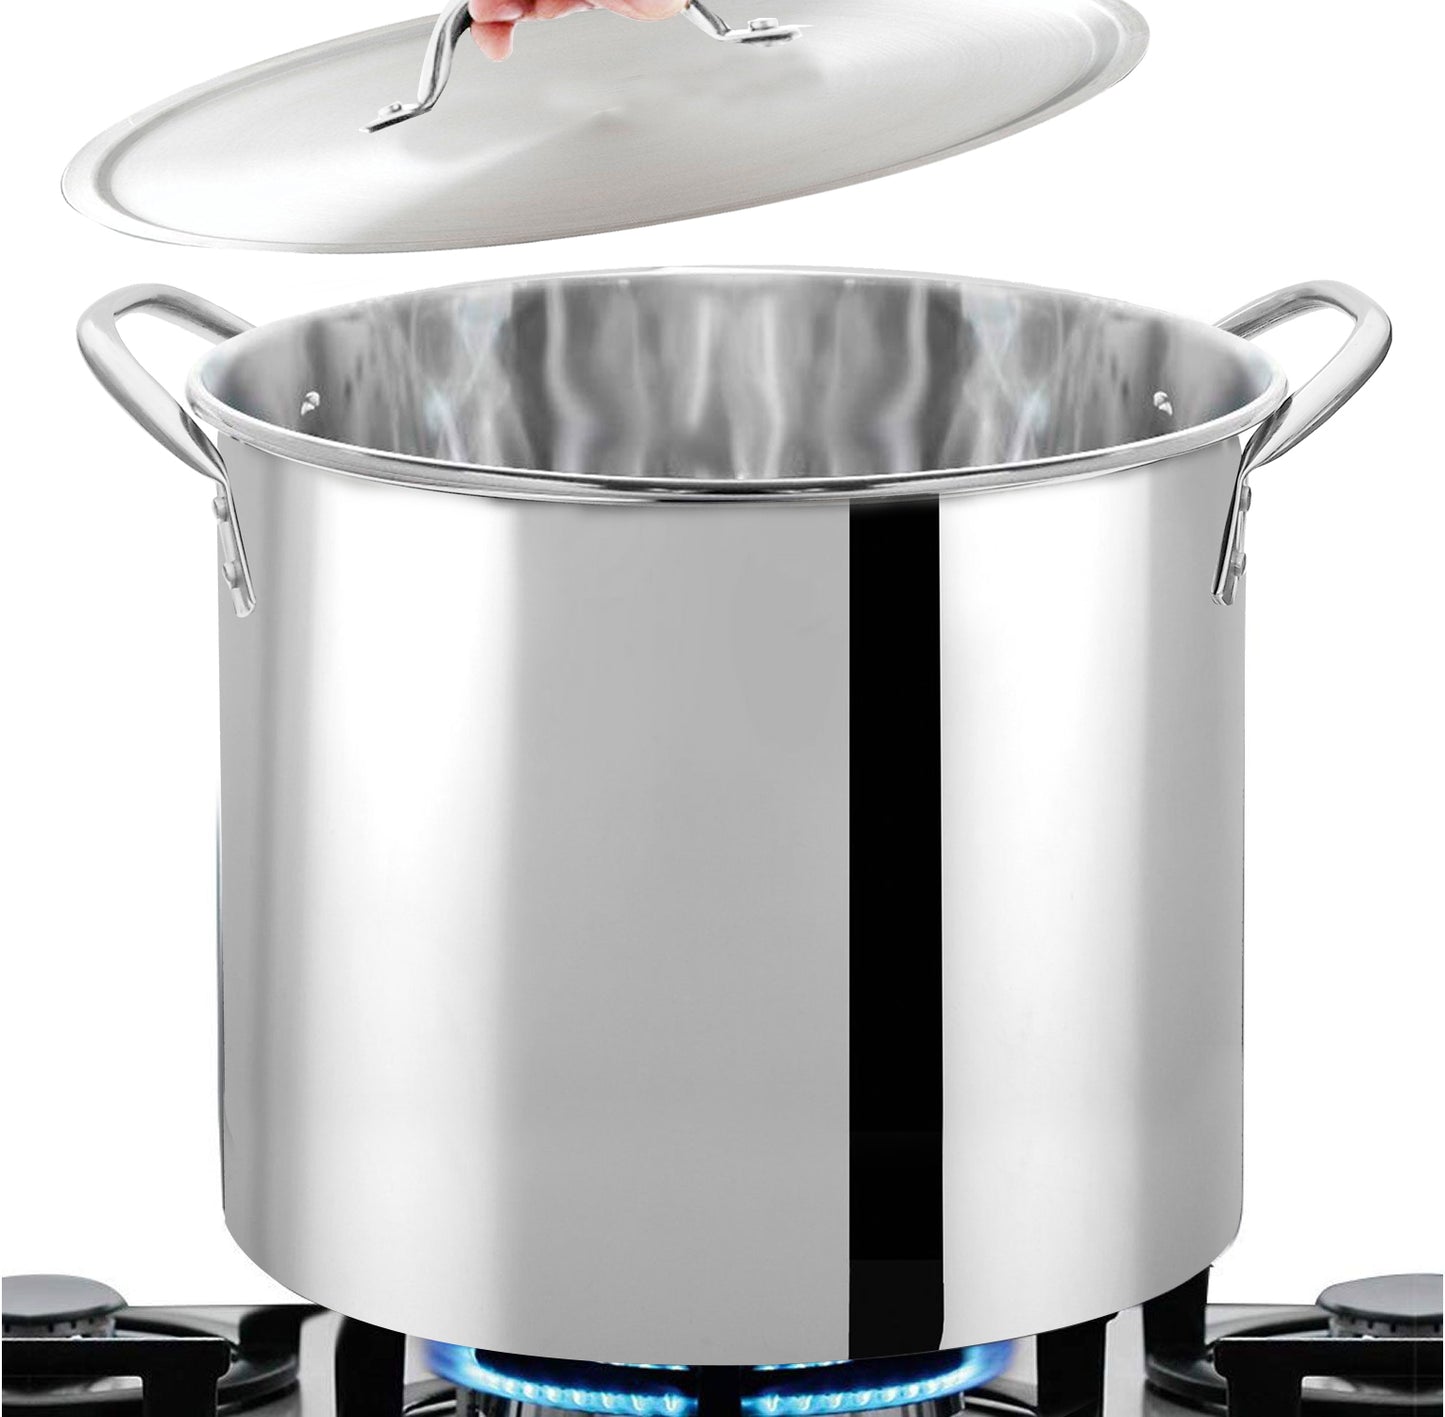 Bene Casa 100Qt Stainless Steel Boiling Pot with Strainer Basket and L